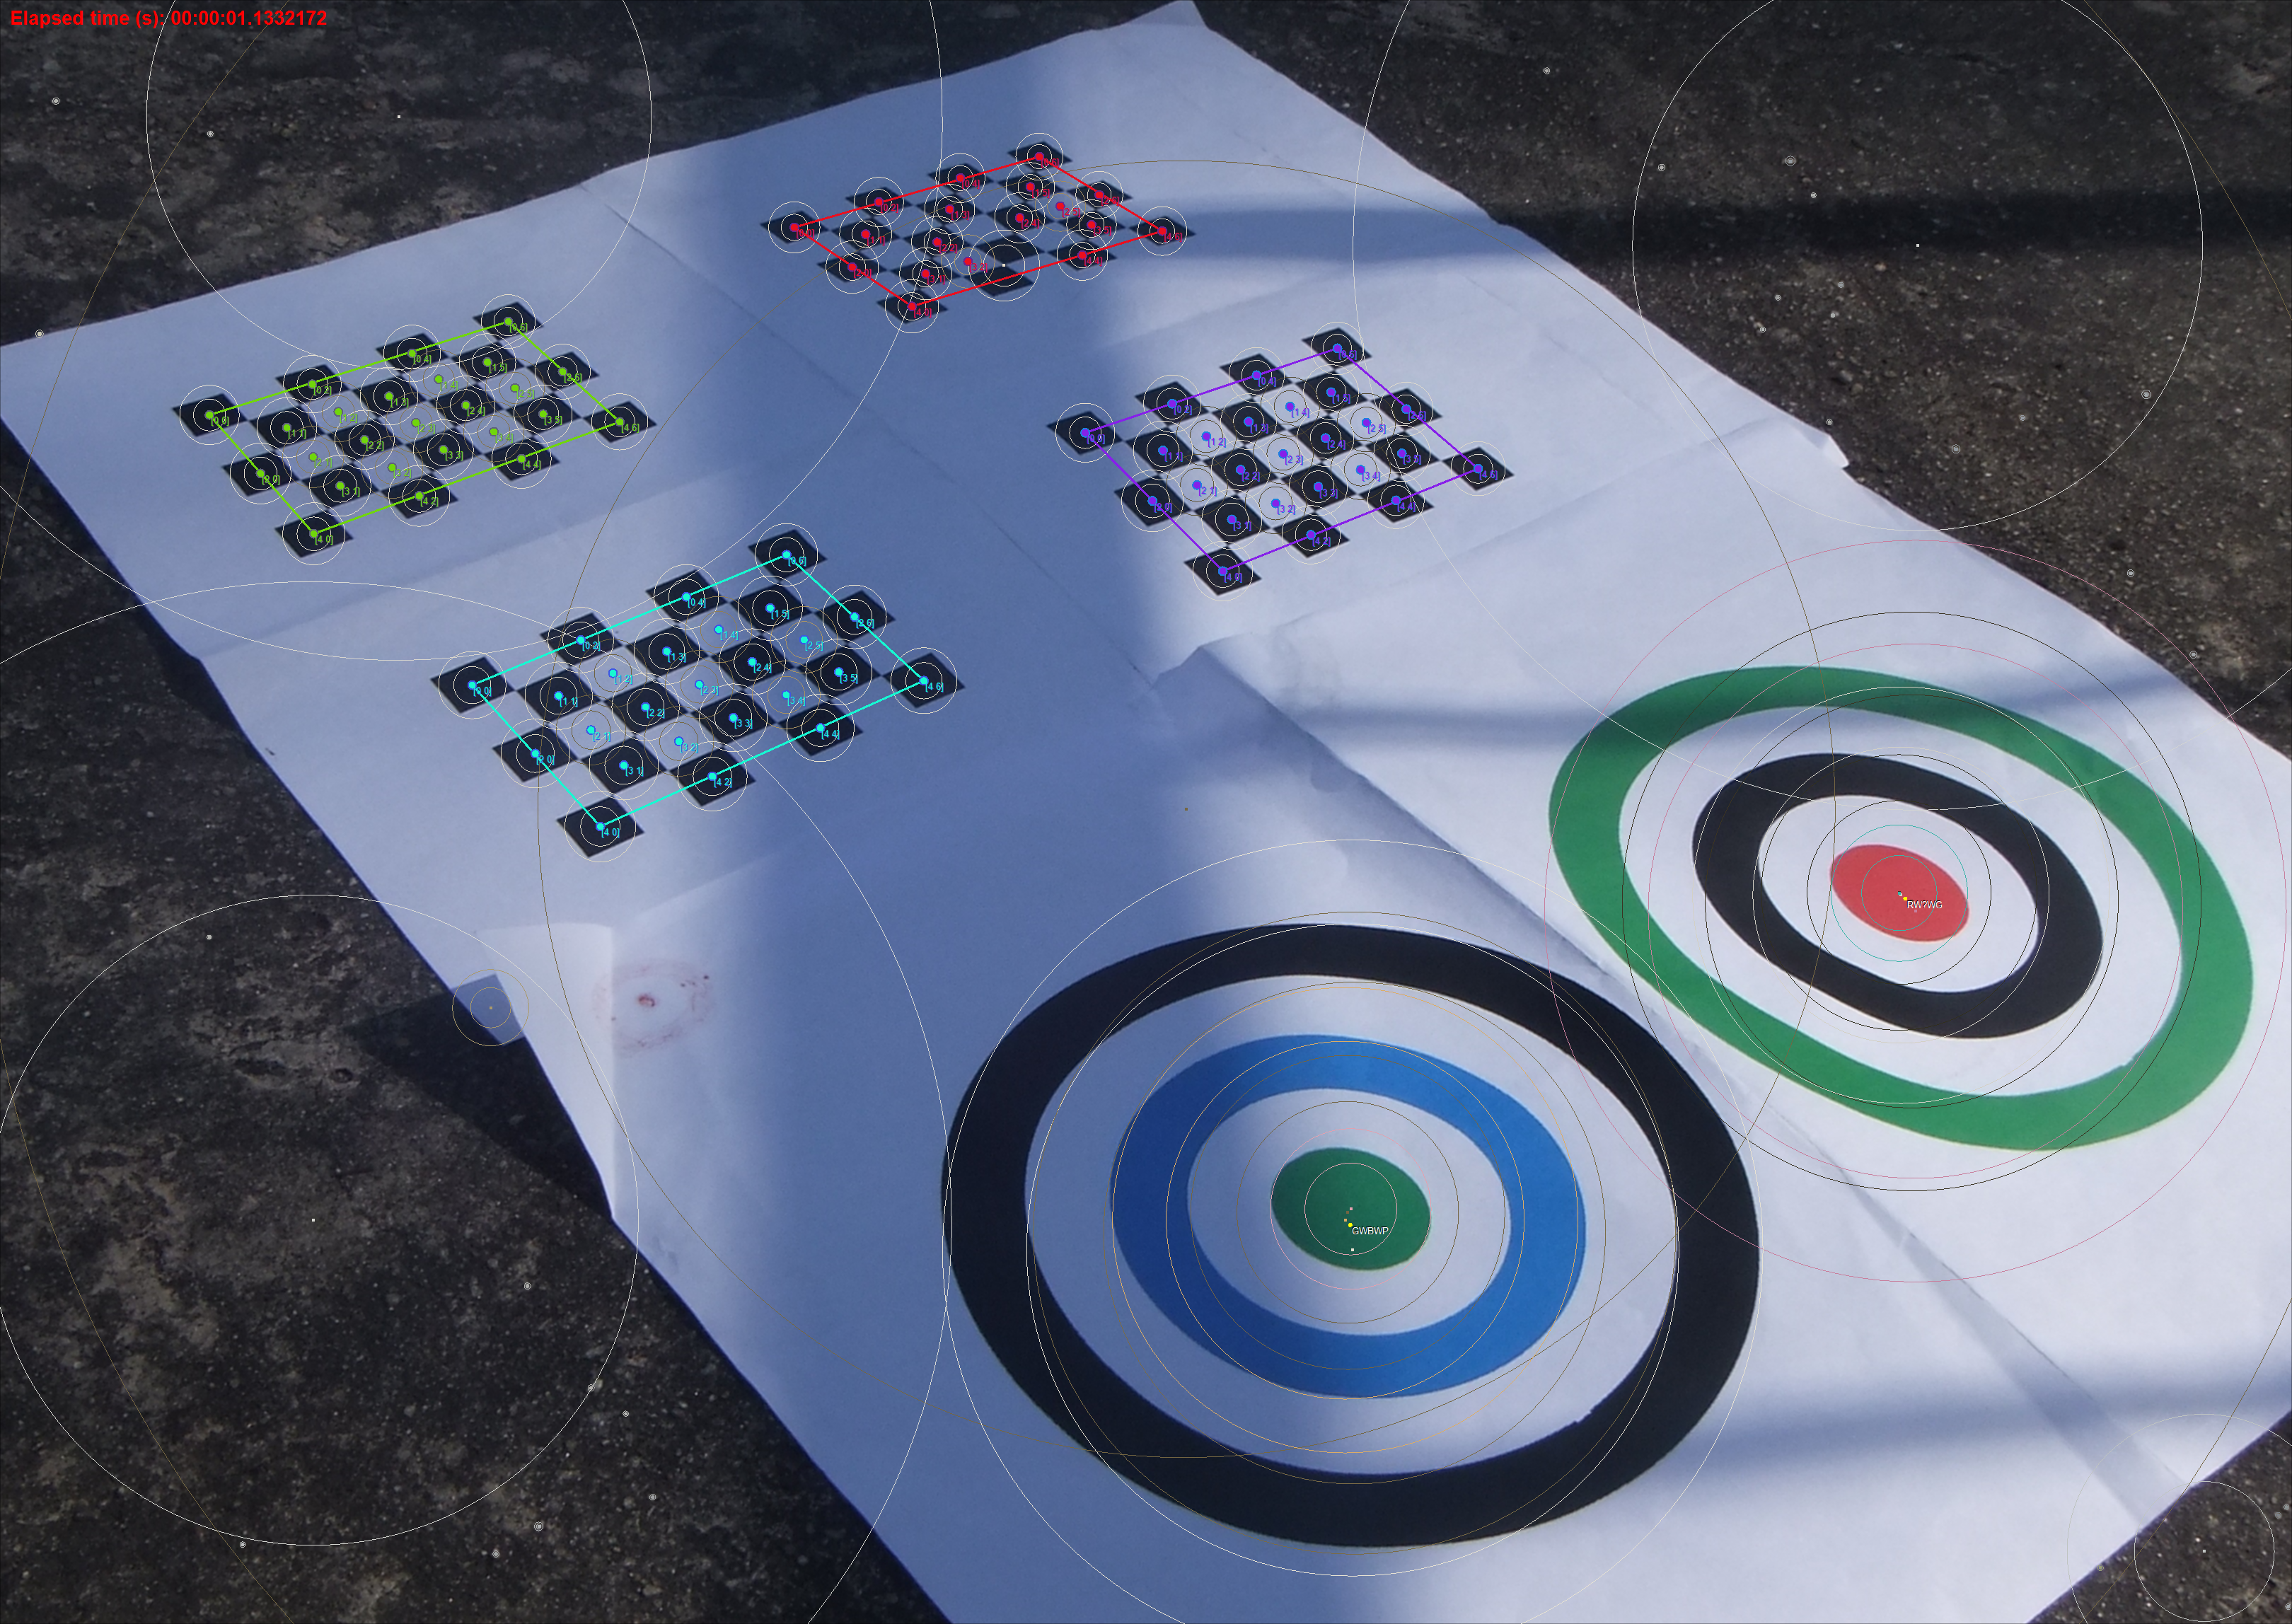 Processed image: checkerboards and targets